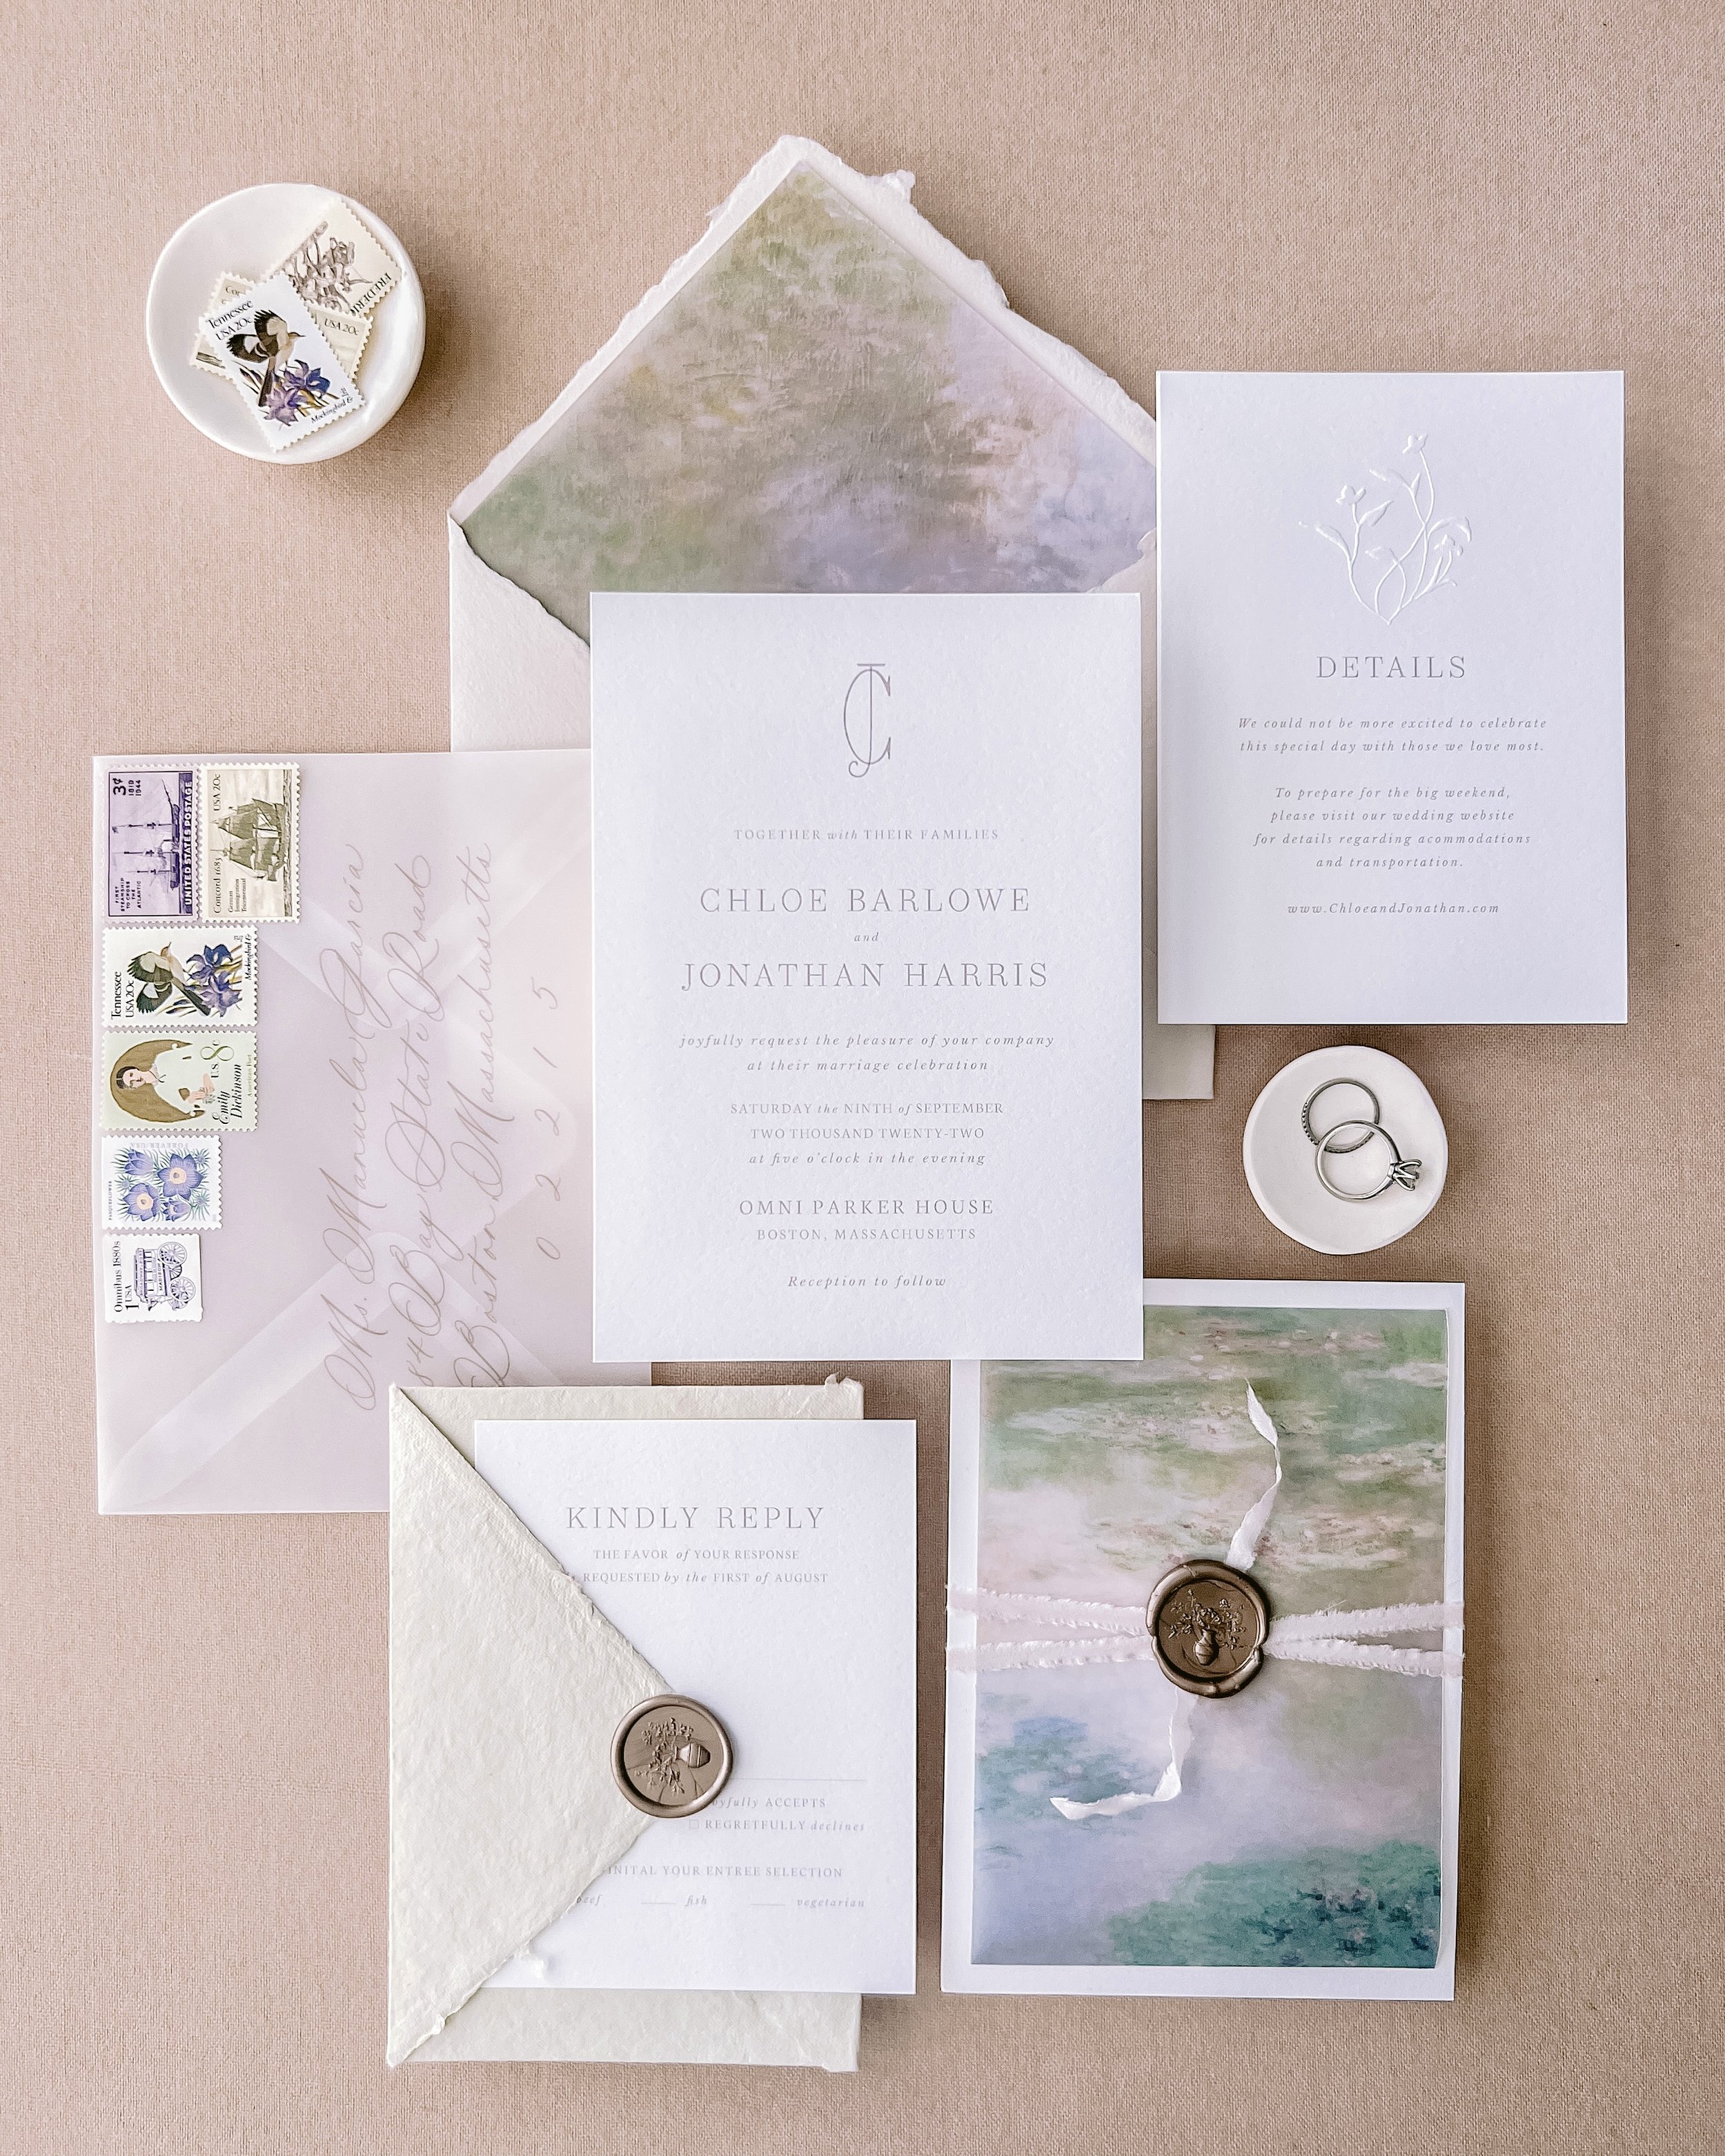 How to Address Wedding Invitations: A Complete Guide